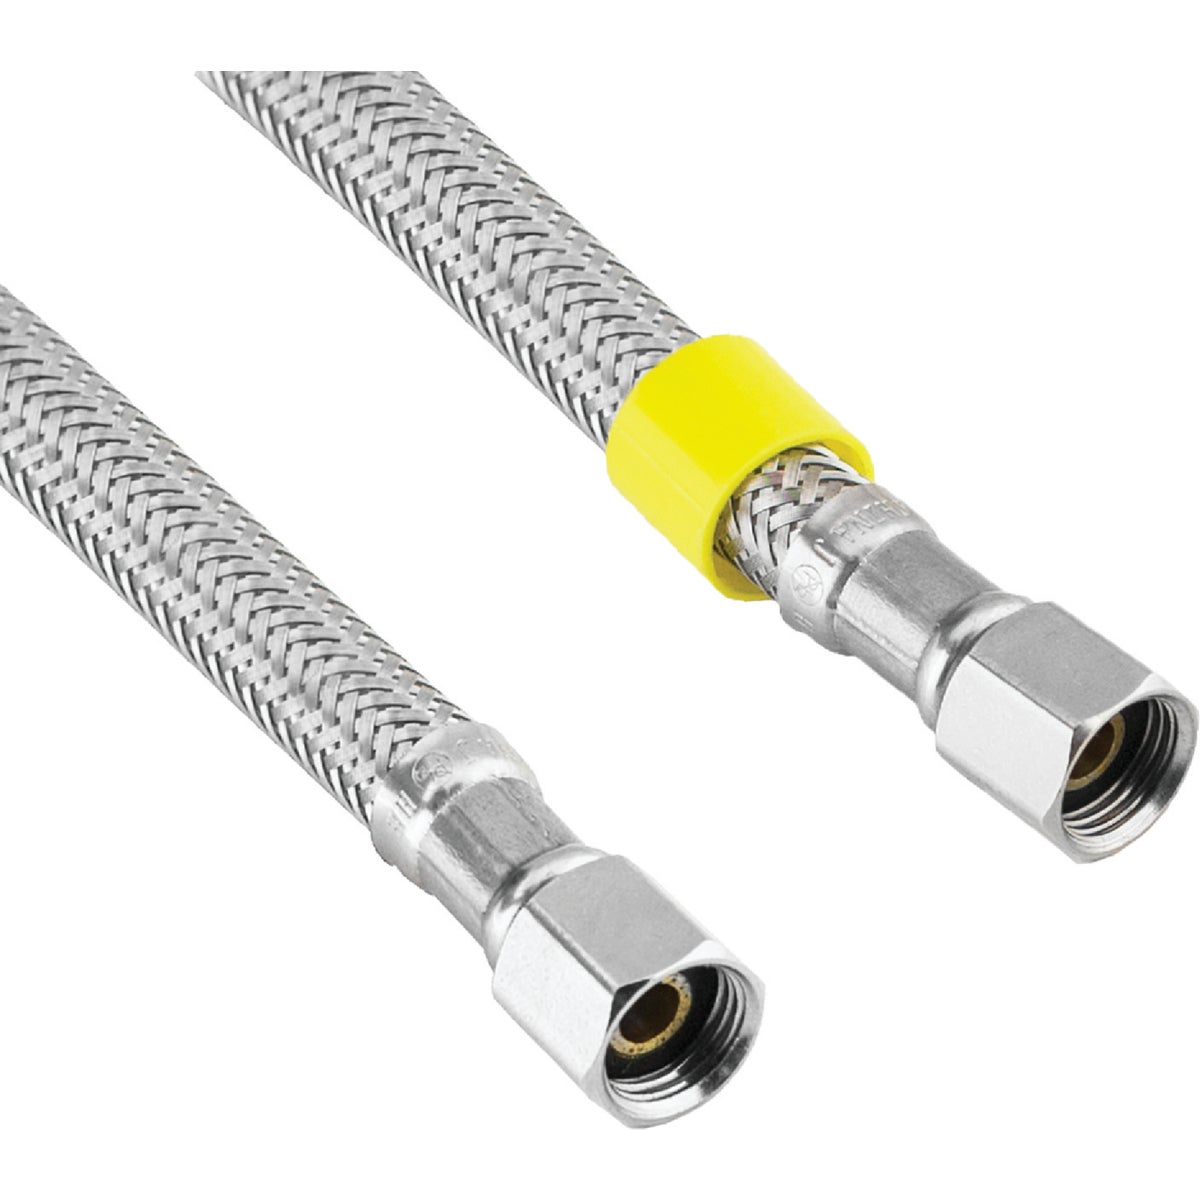 Lasco 1/4 In. x 1/4 In. x 10 Ft. Length Braided Supply Ice Maker Connector Hose